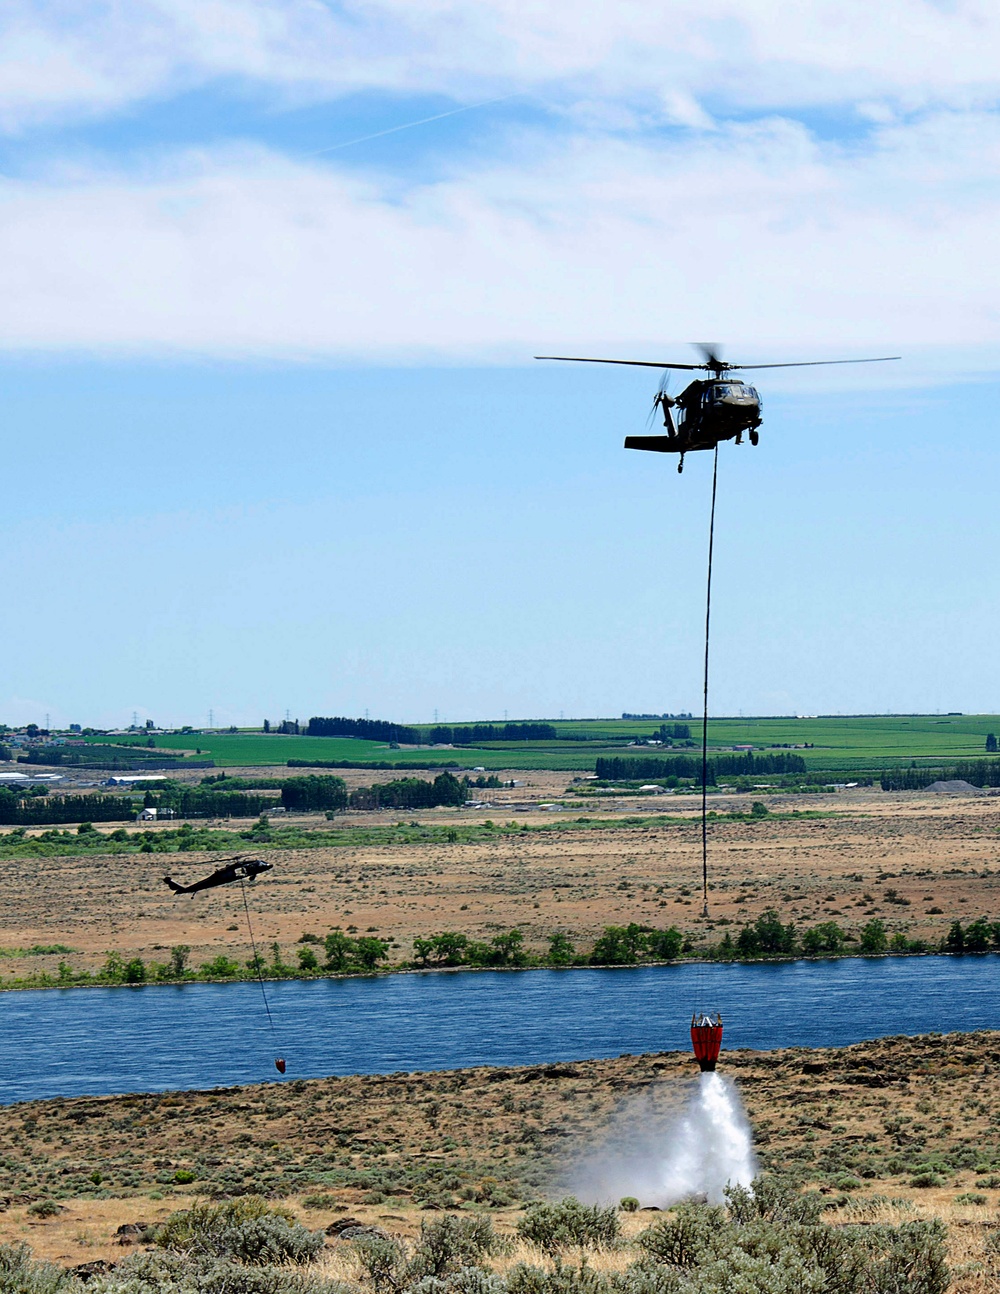 Wildfire preparedness is a year-round priority for the Washington National Guard